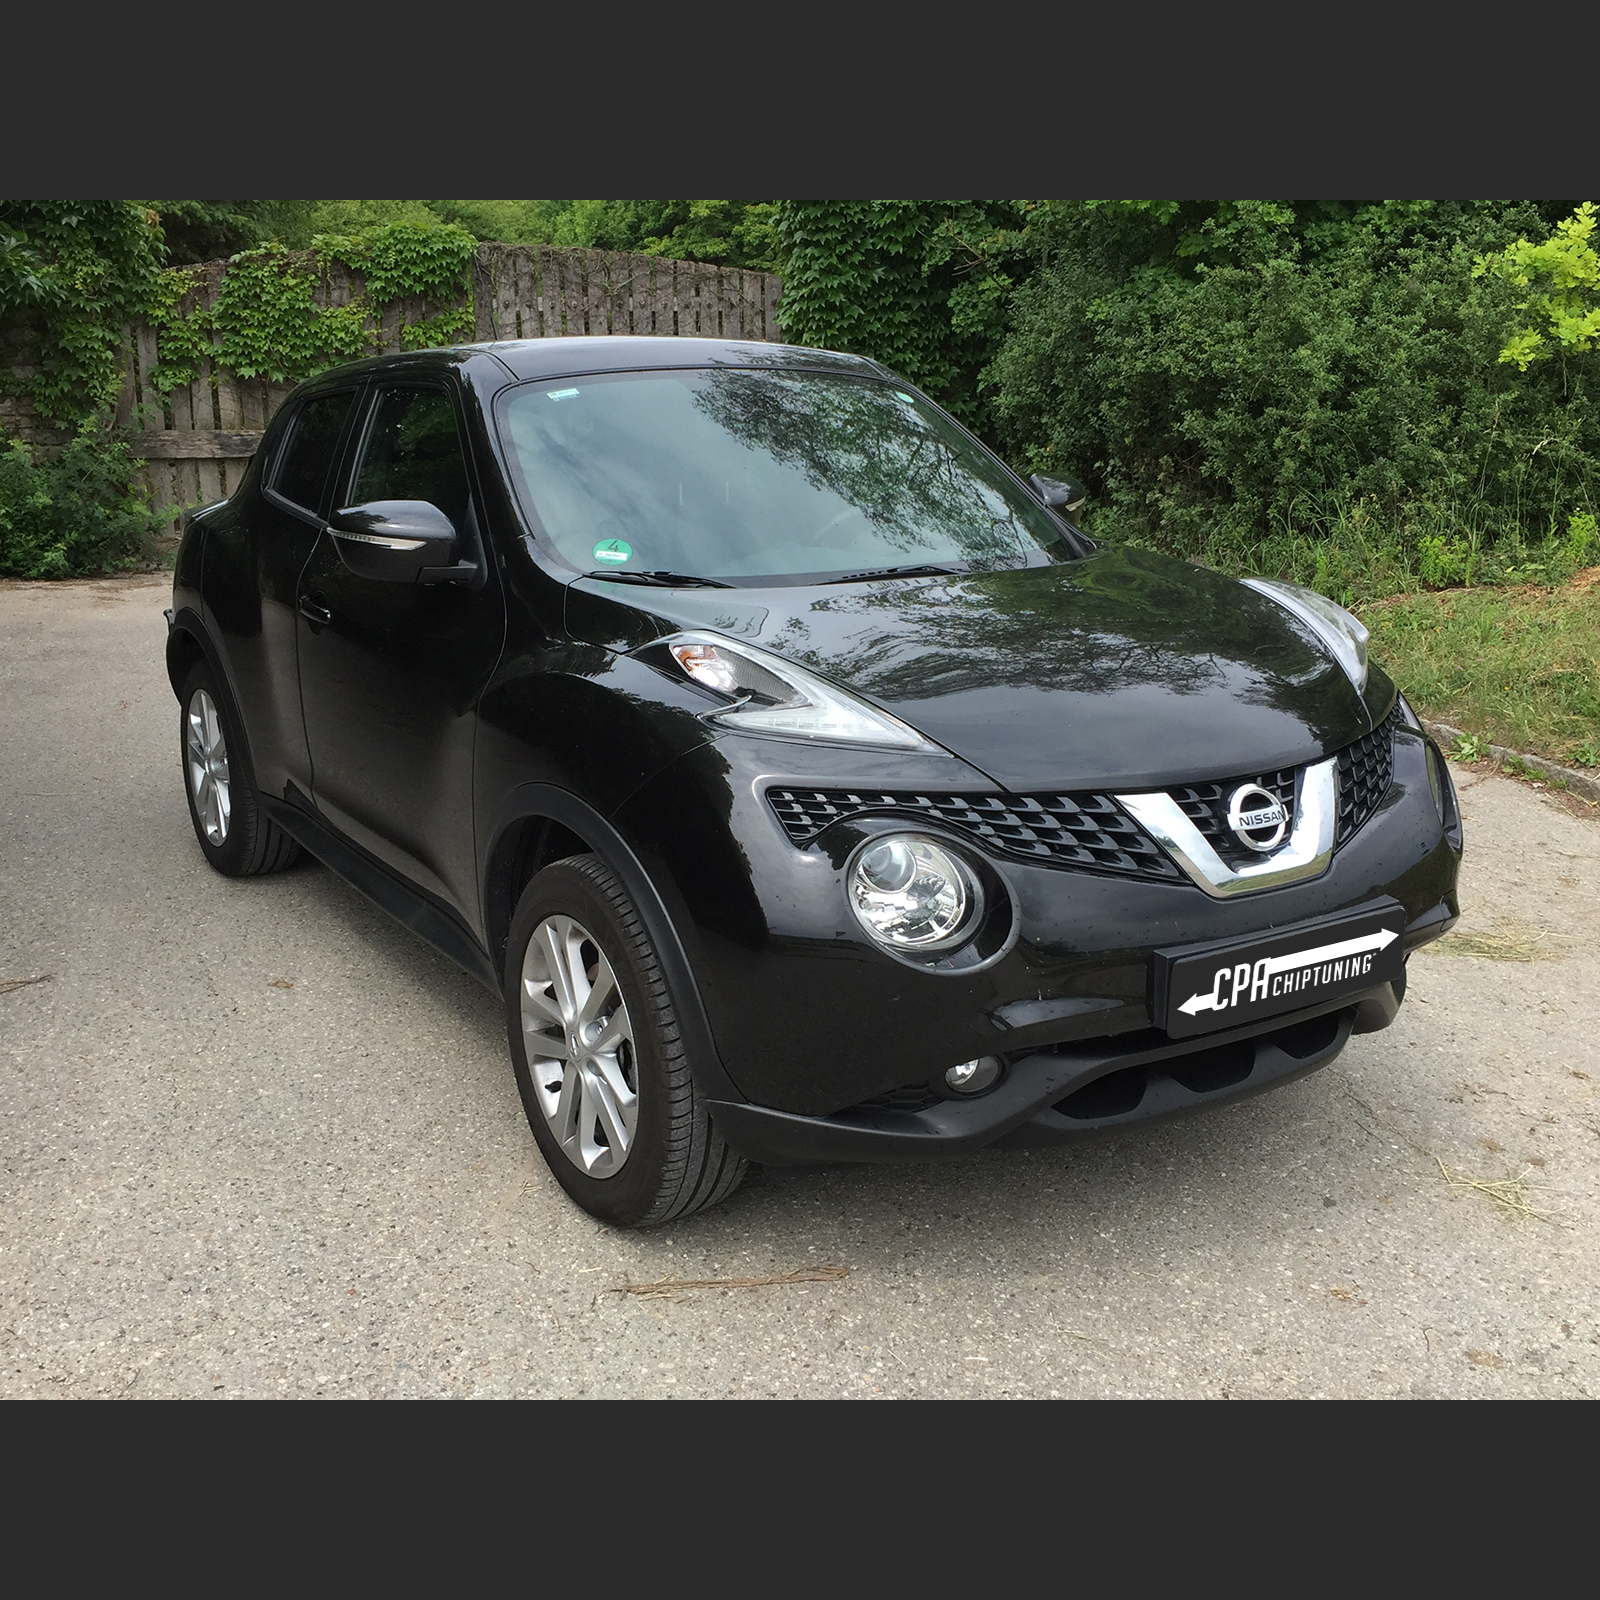 More steam for the Nissan Juke